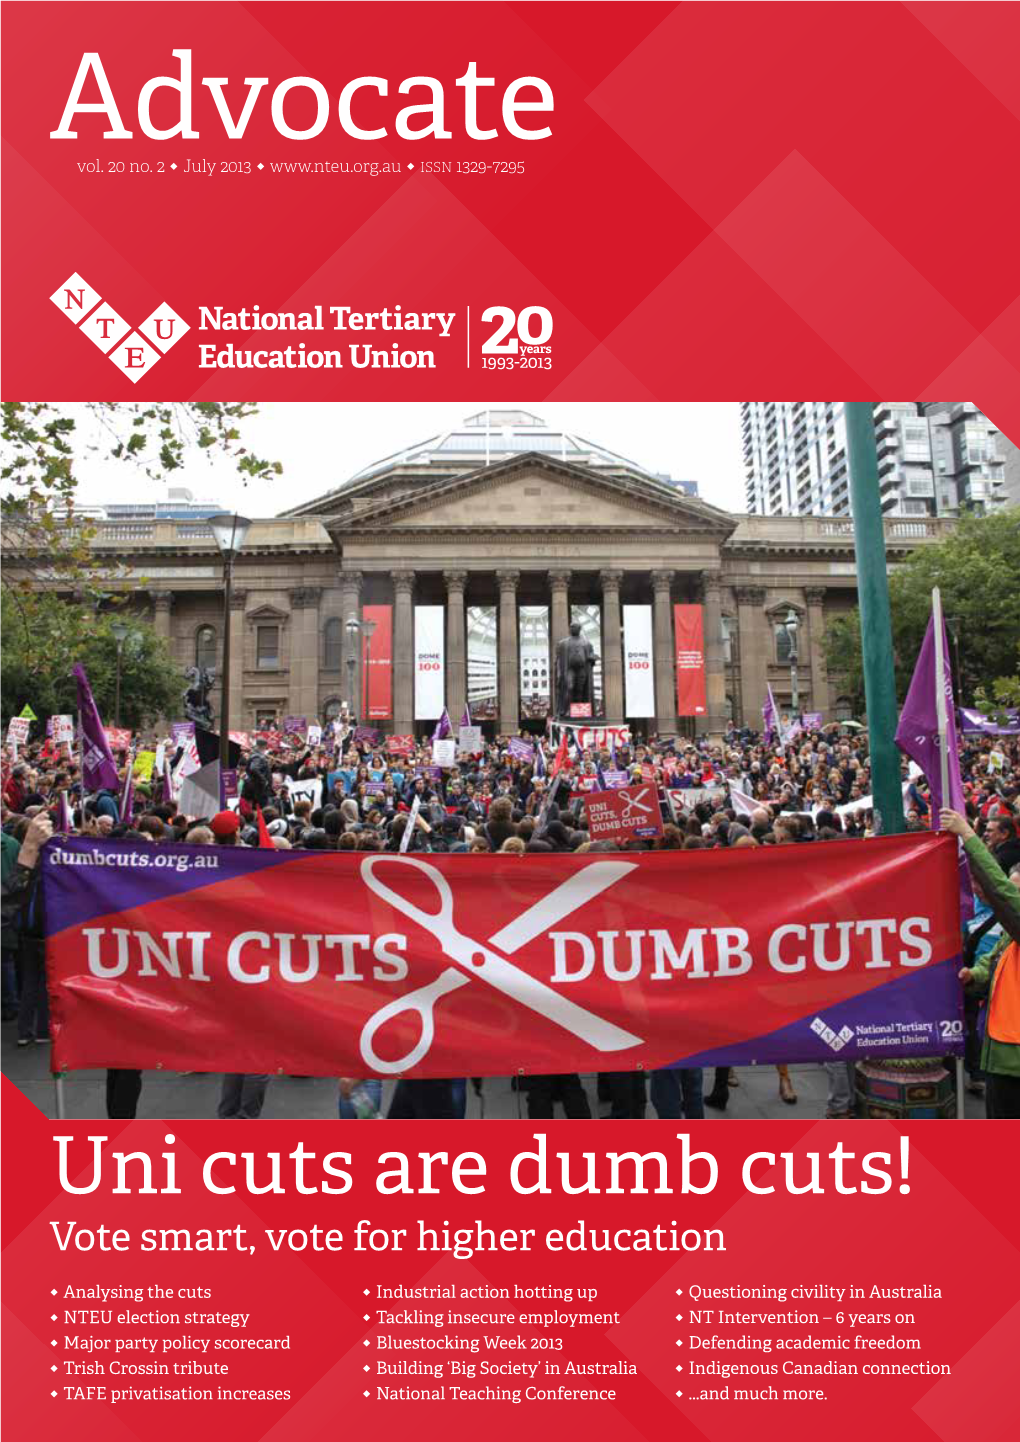 Uni Cuts Are Dumb Cuts! Vote Smart, Vote for Higher Education